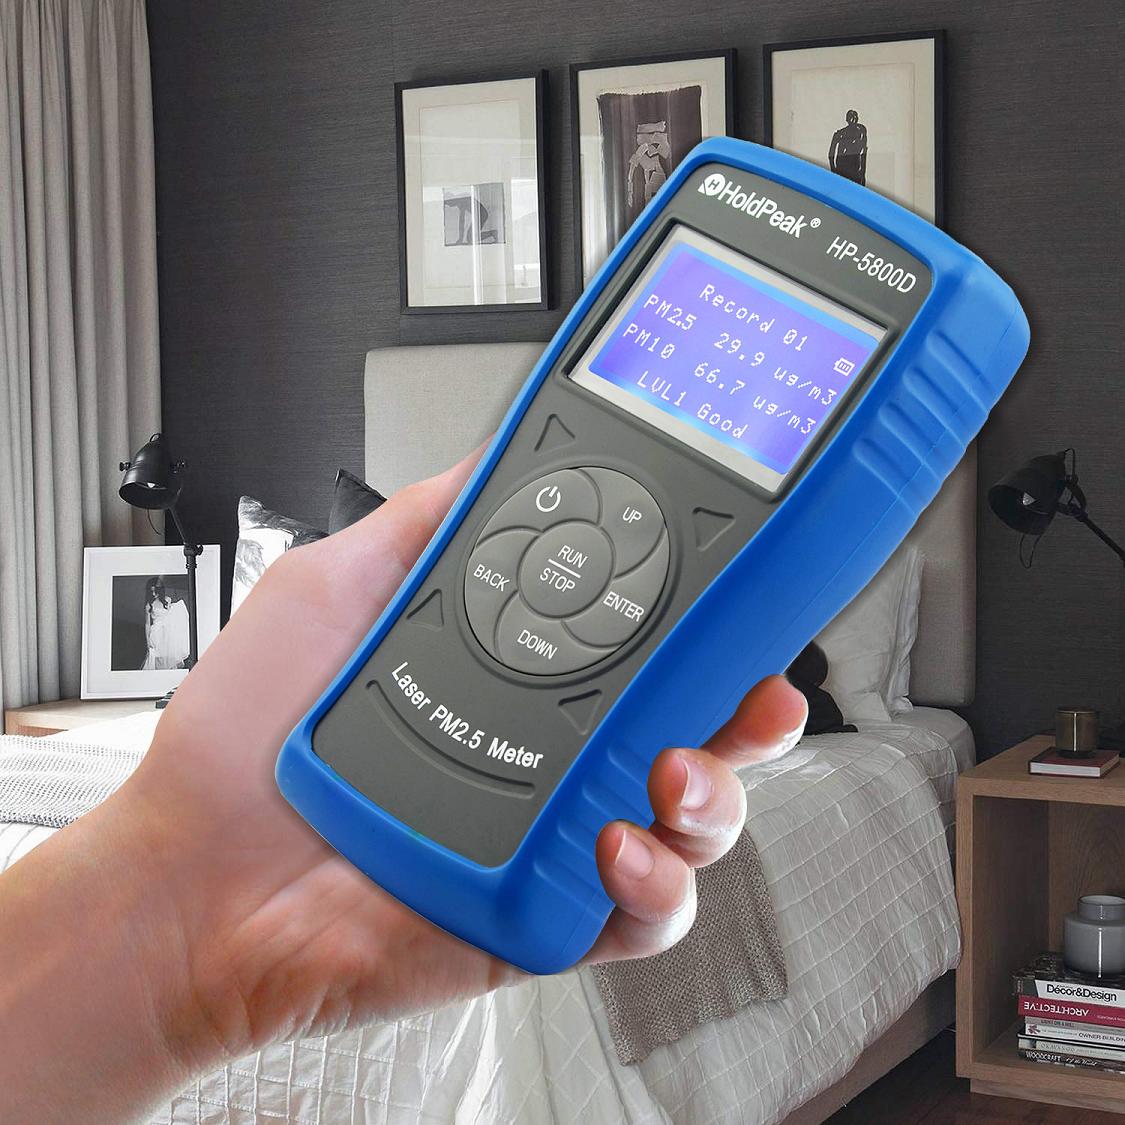 HoldPeak unique air quality meter from china for hotel